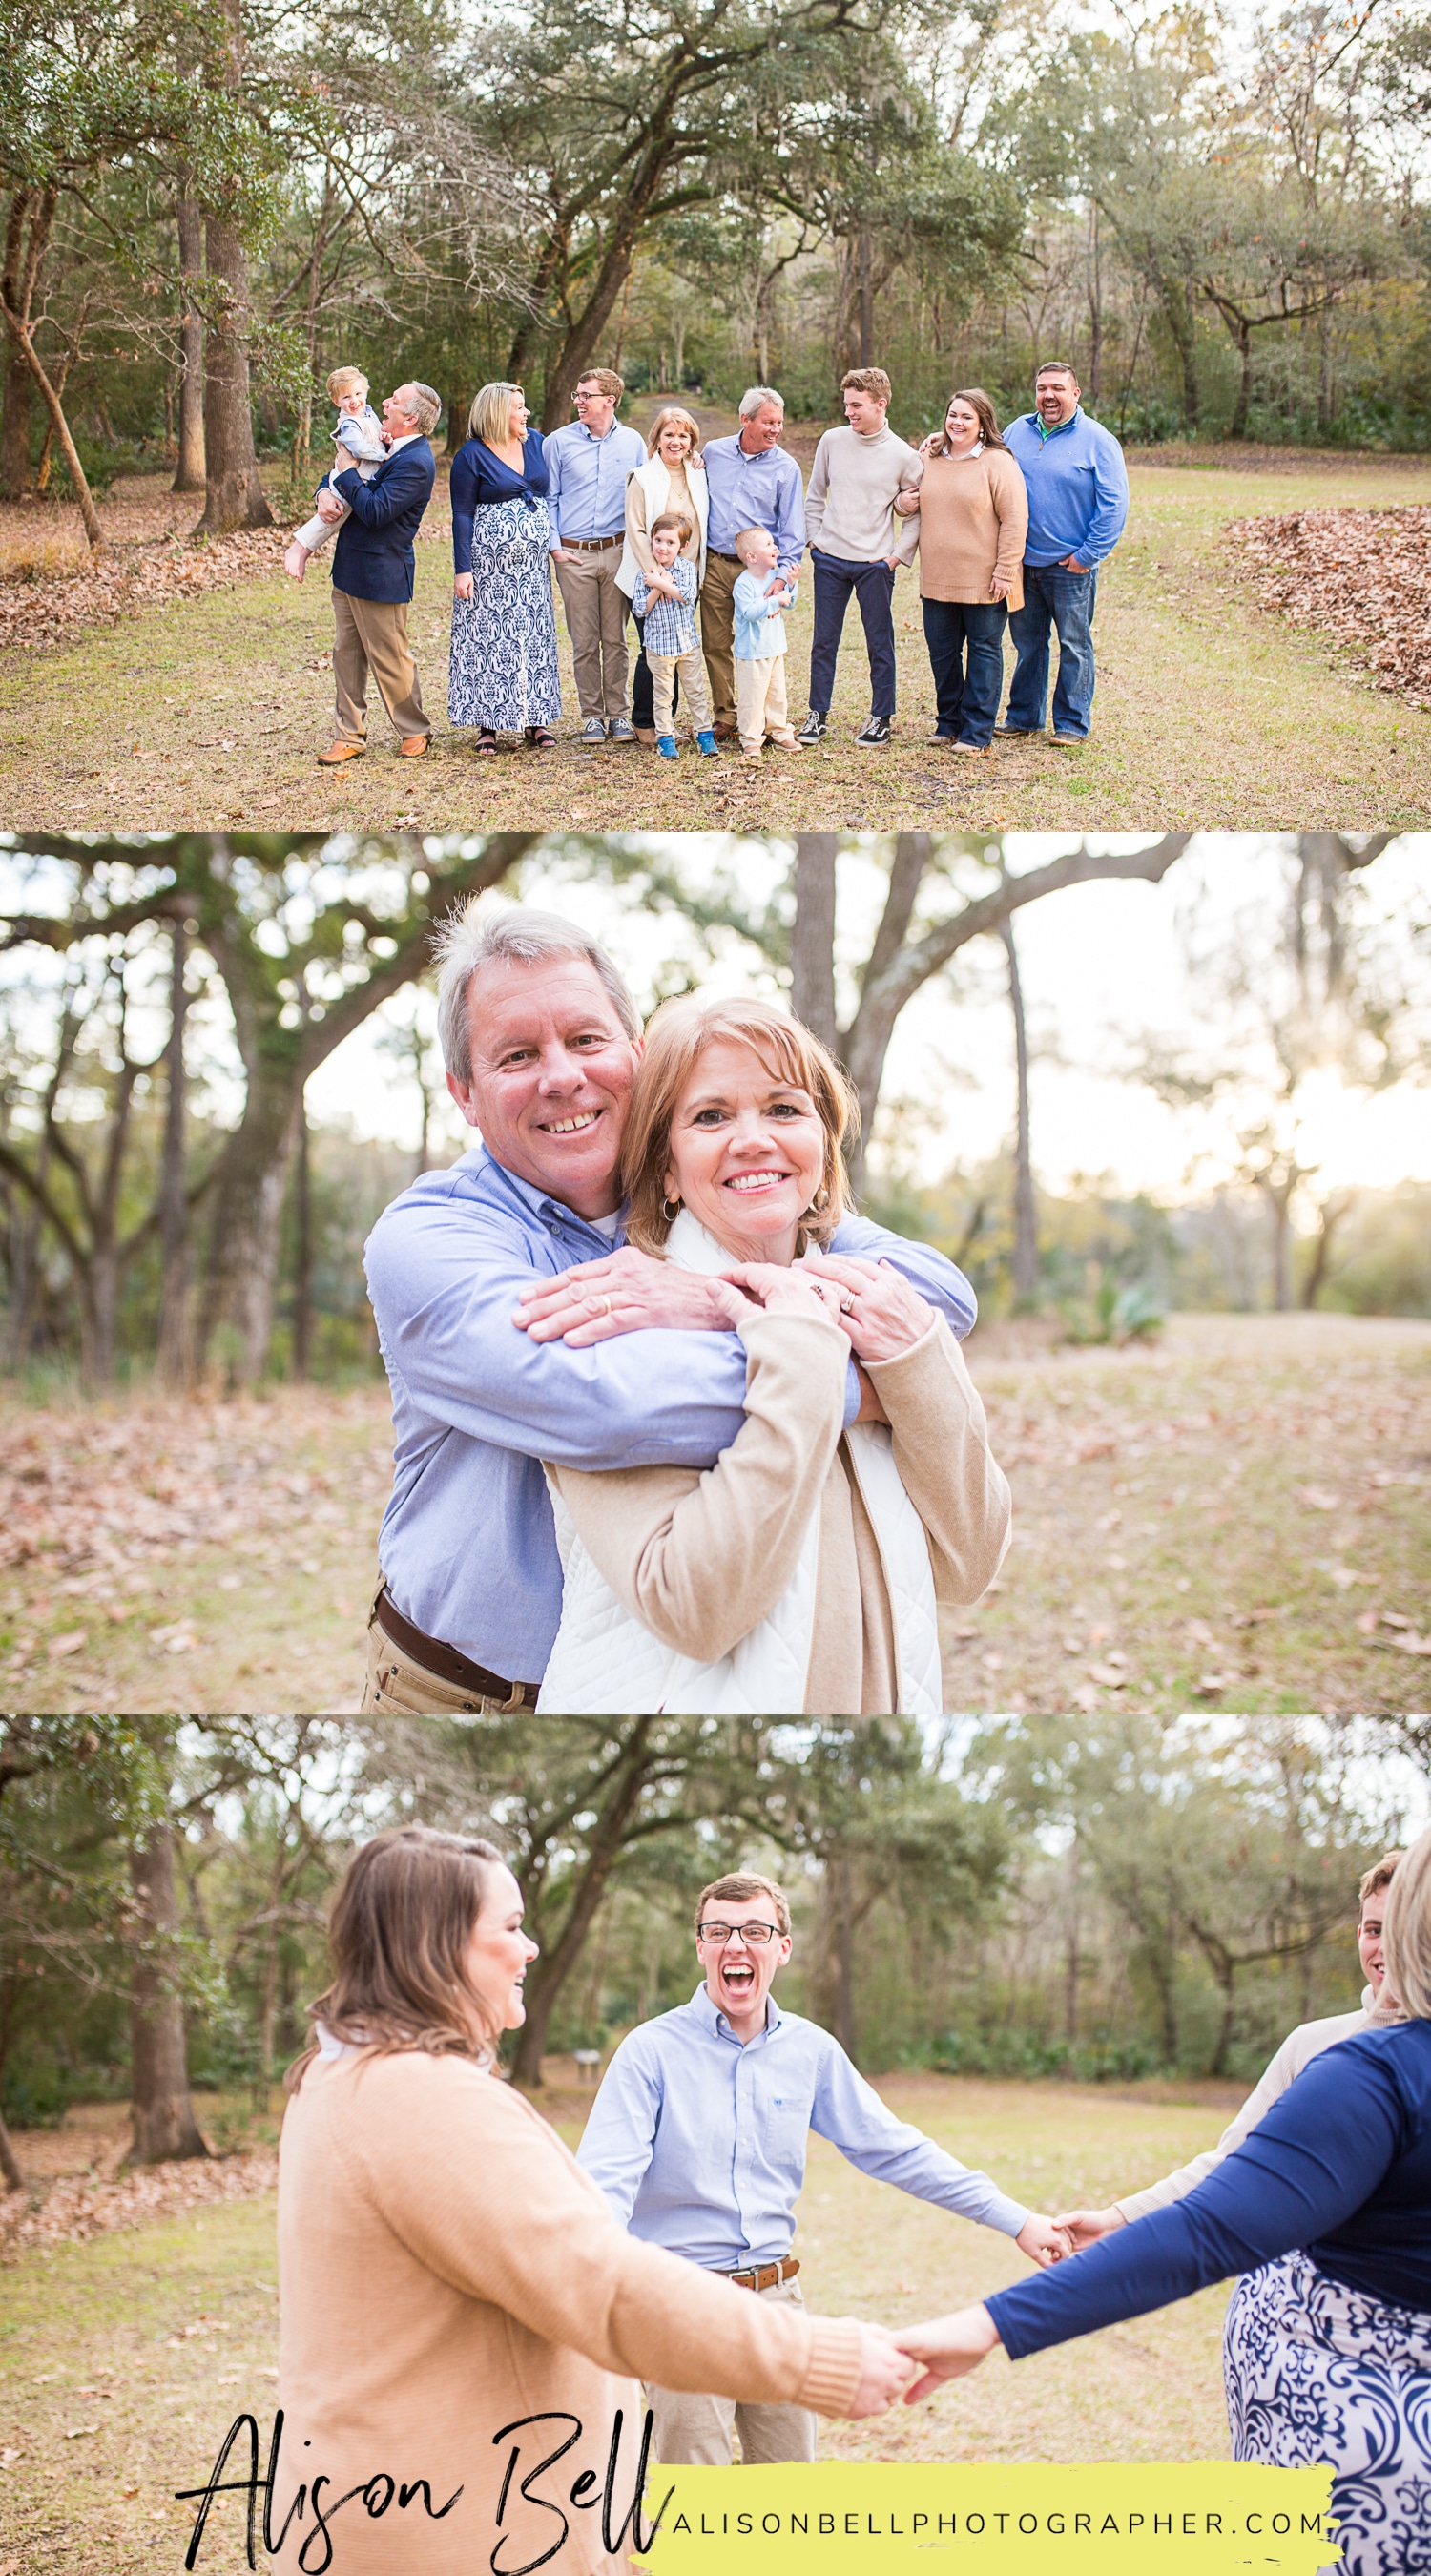 Extended family session with adult children, grandkids, and grandparents at Colonial Dorchester State Park in Charleston, South Carolina by Alison Bell, Photographer